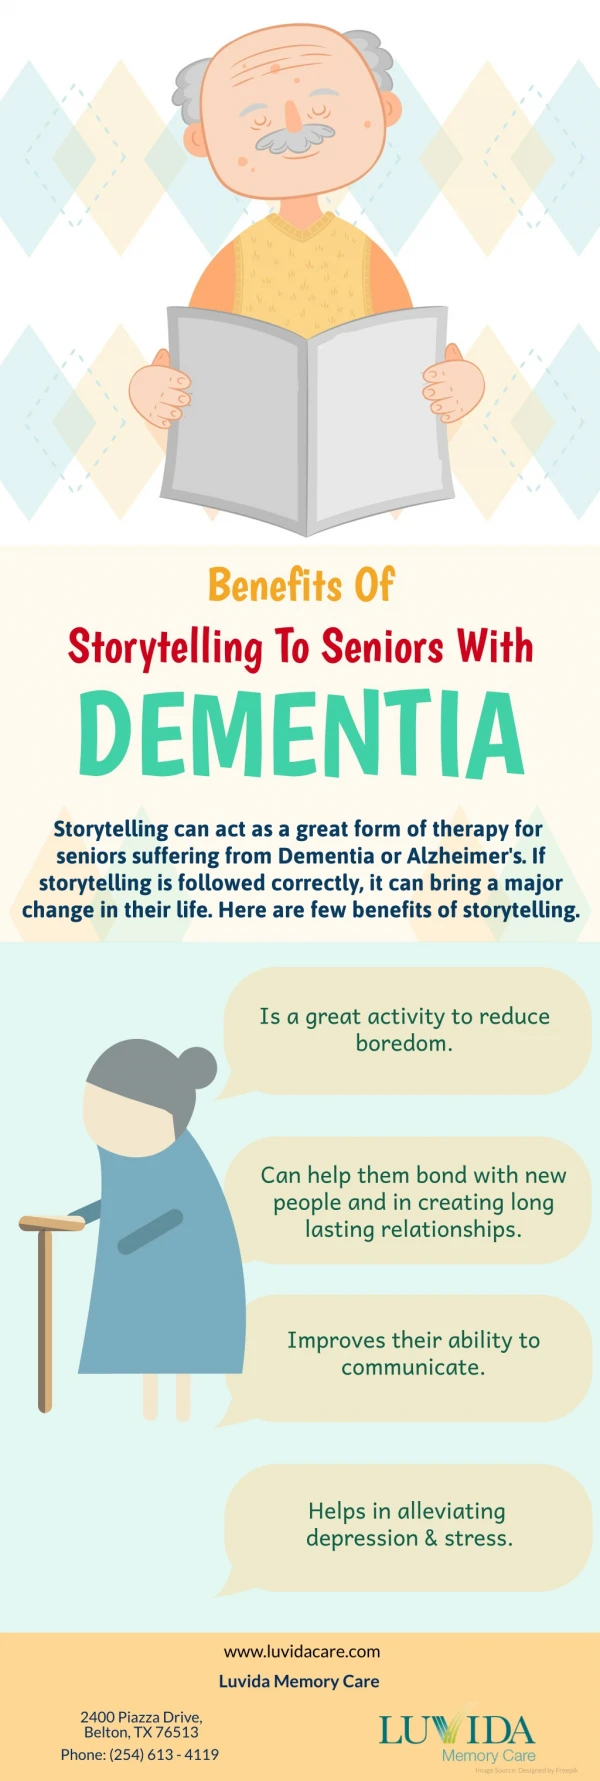 Benefits Of Storytelling To Seniors With Dementia